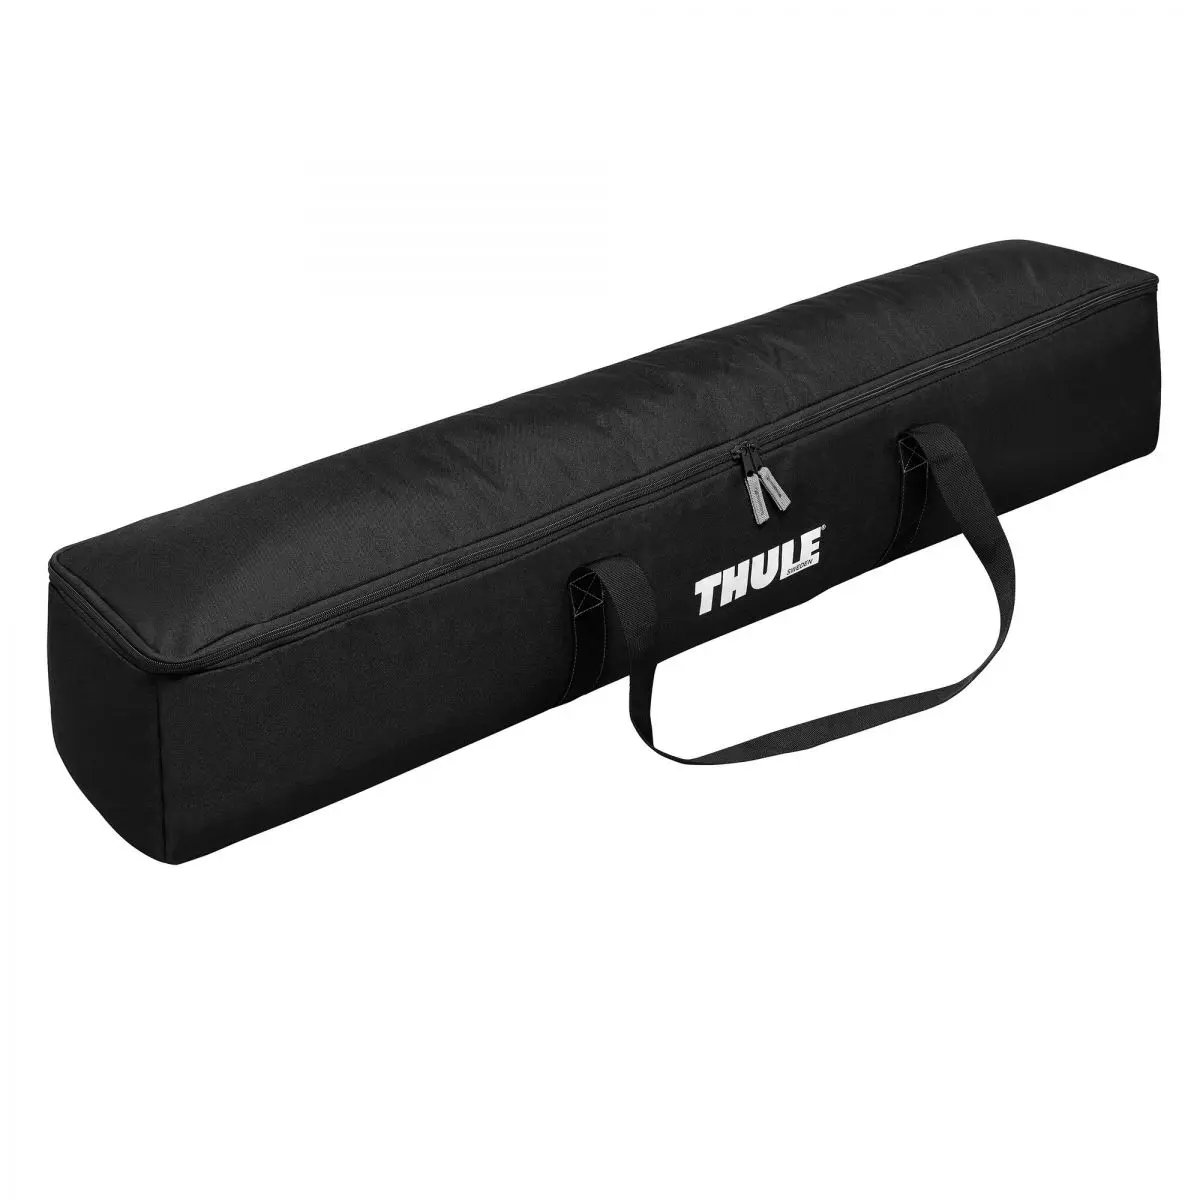 Thule Panorama pentru TO 8000, lungime 5,5 m, inaltime L